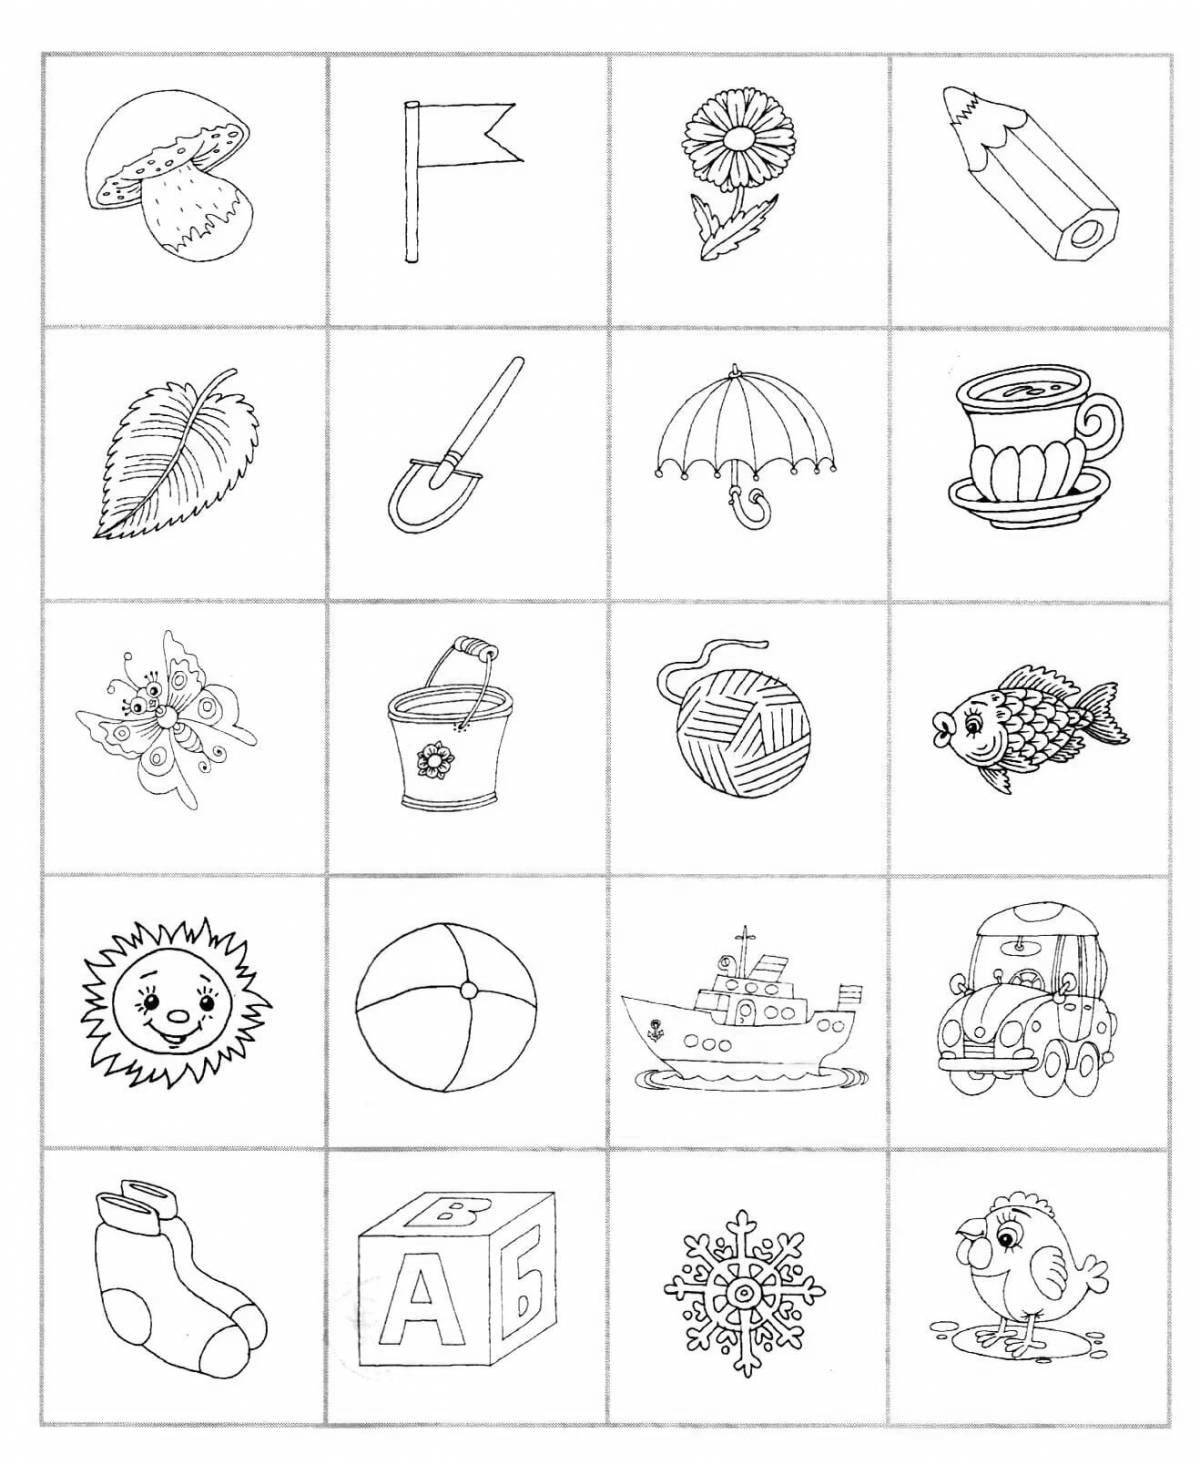 Colourful coloring pages for adults